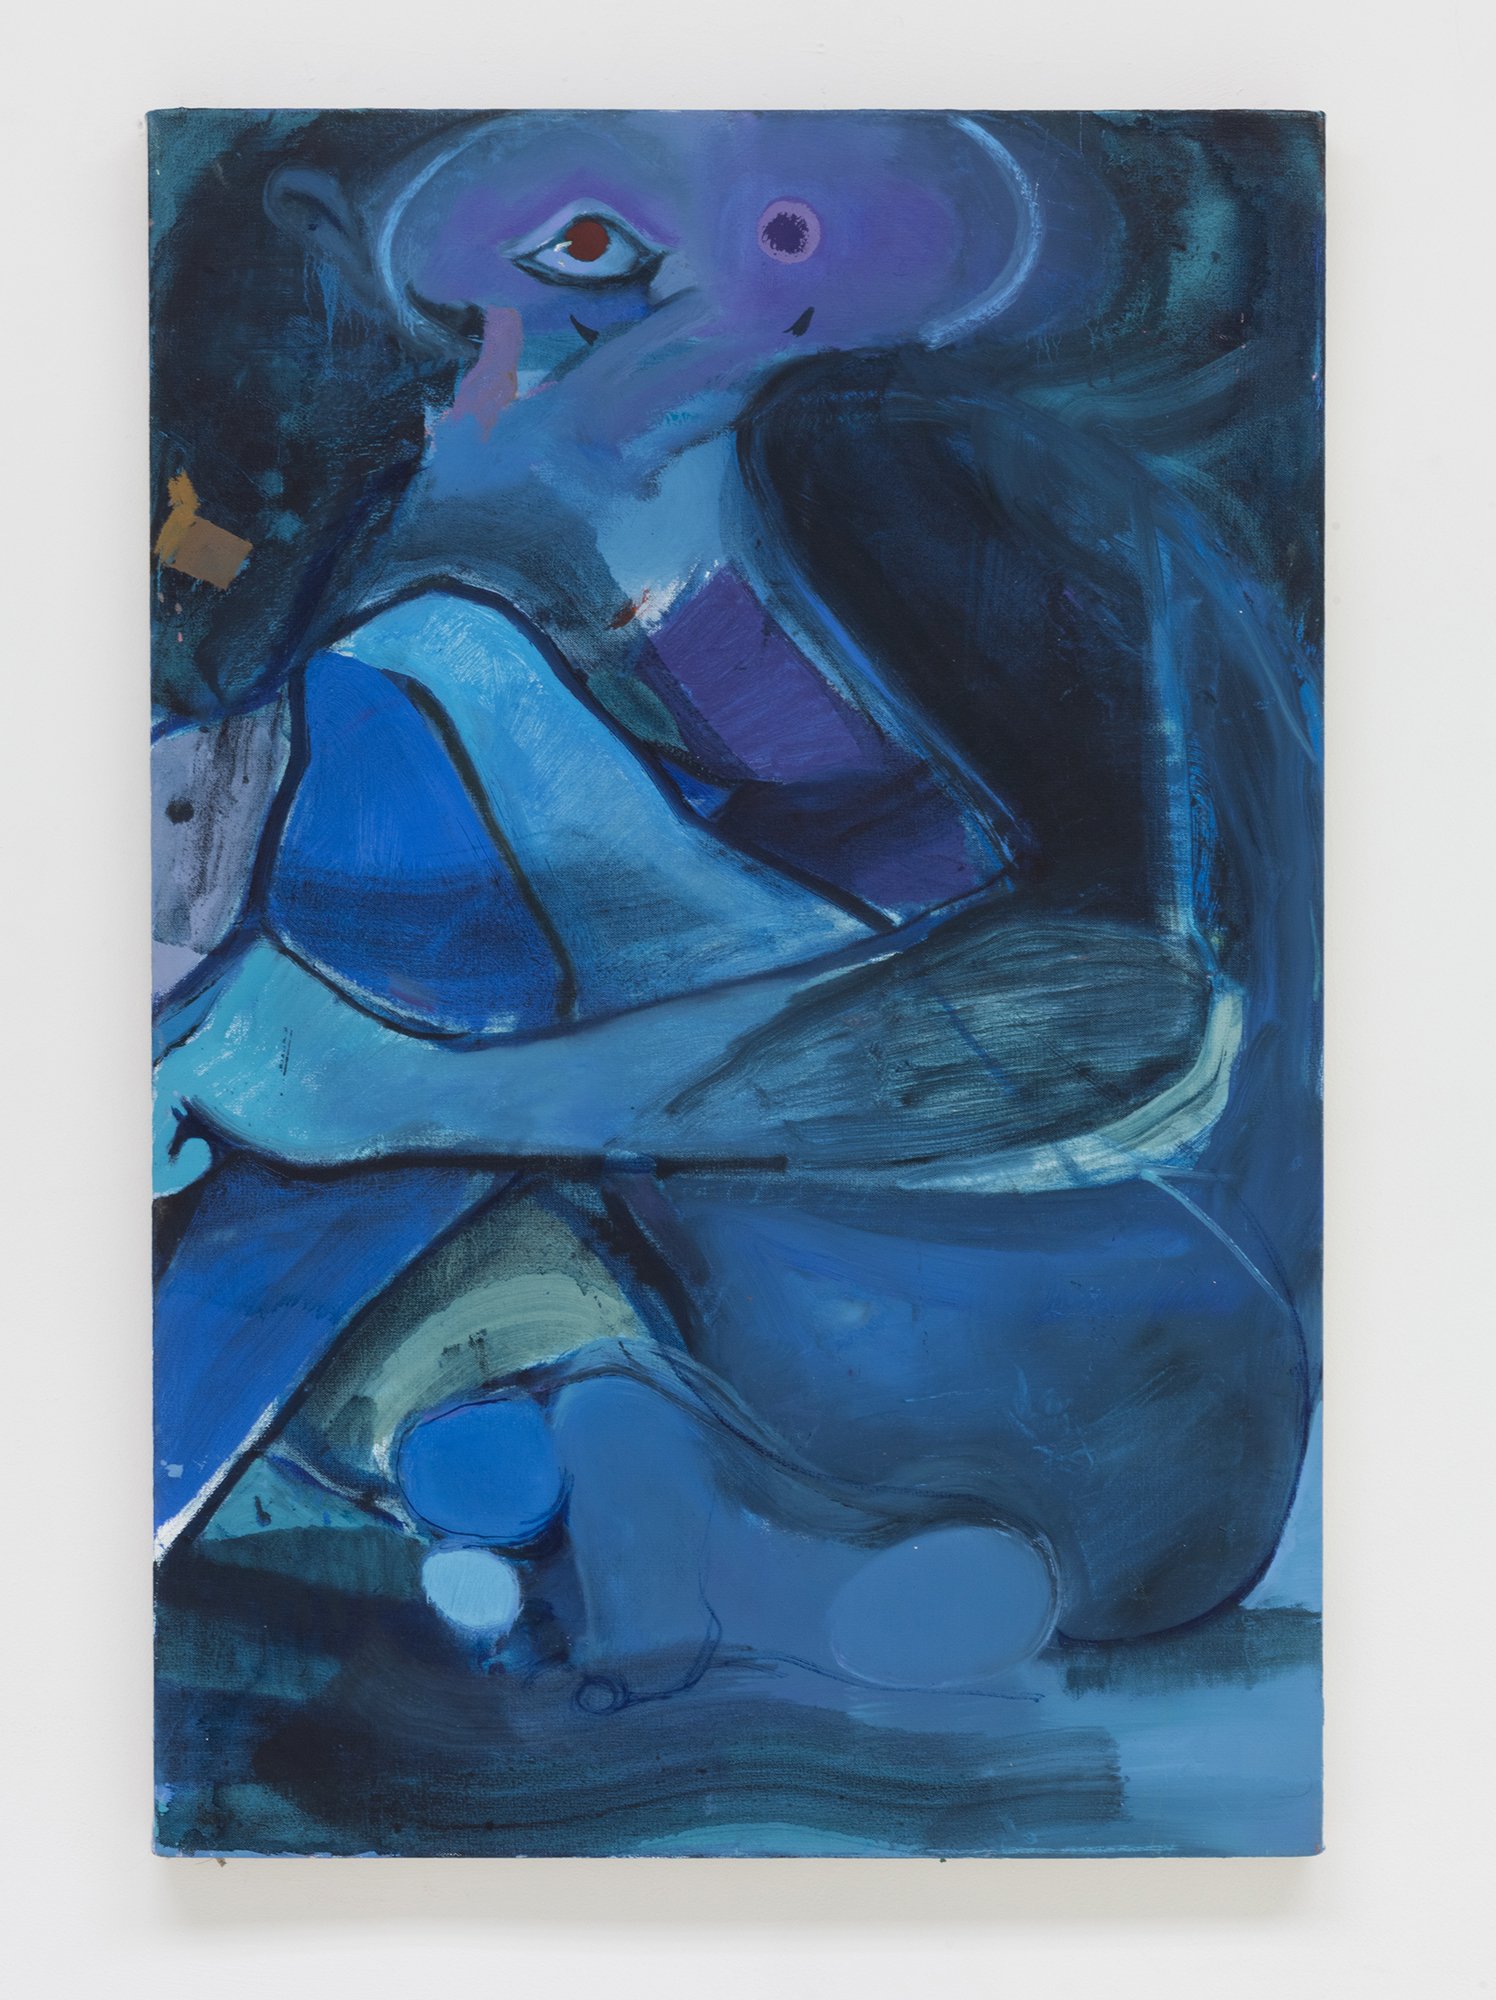  Stefan Hoza,  Laugher (blue),  2021. Oil on canvas. 36 x 24 inches. 